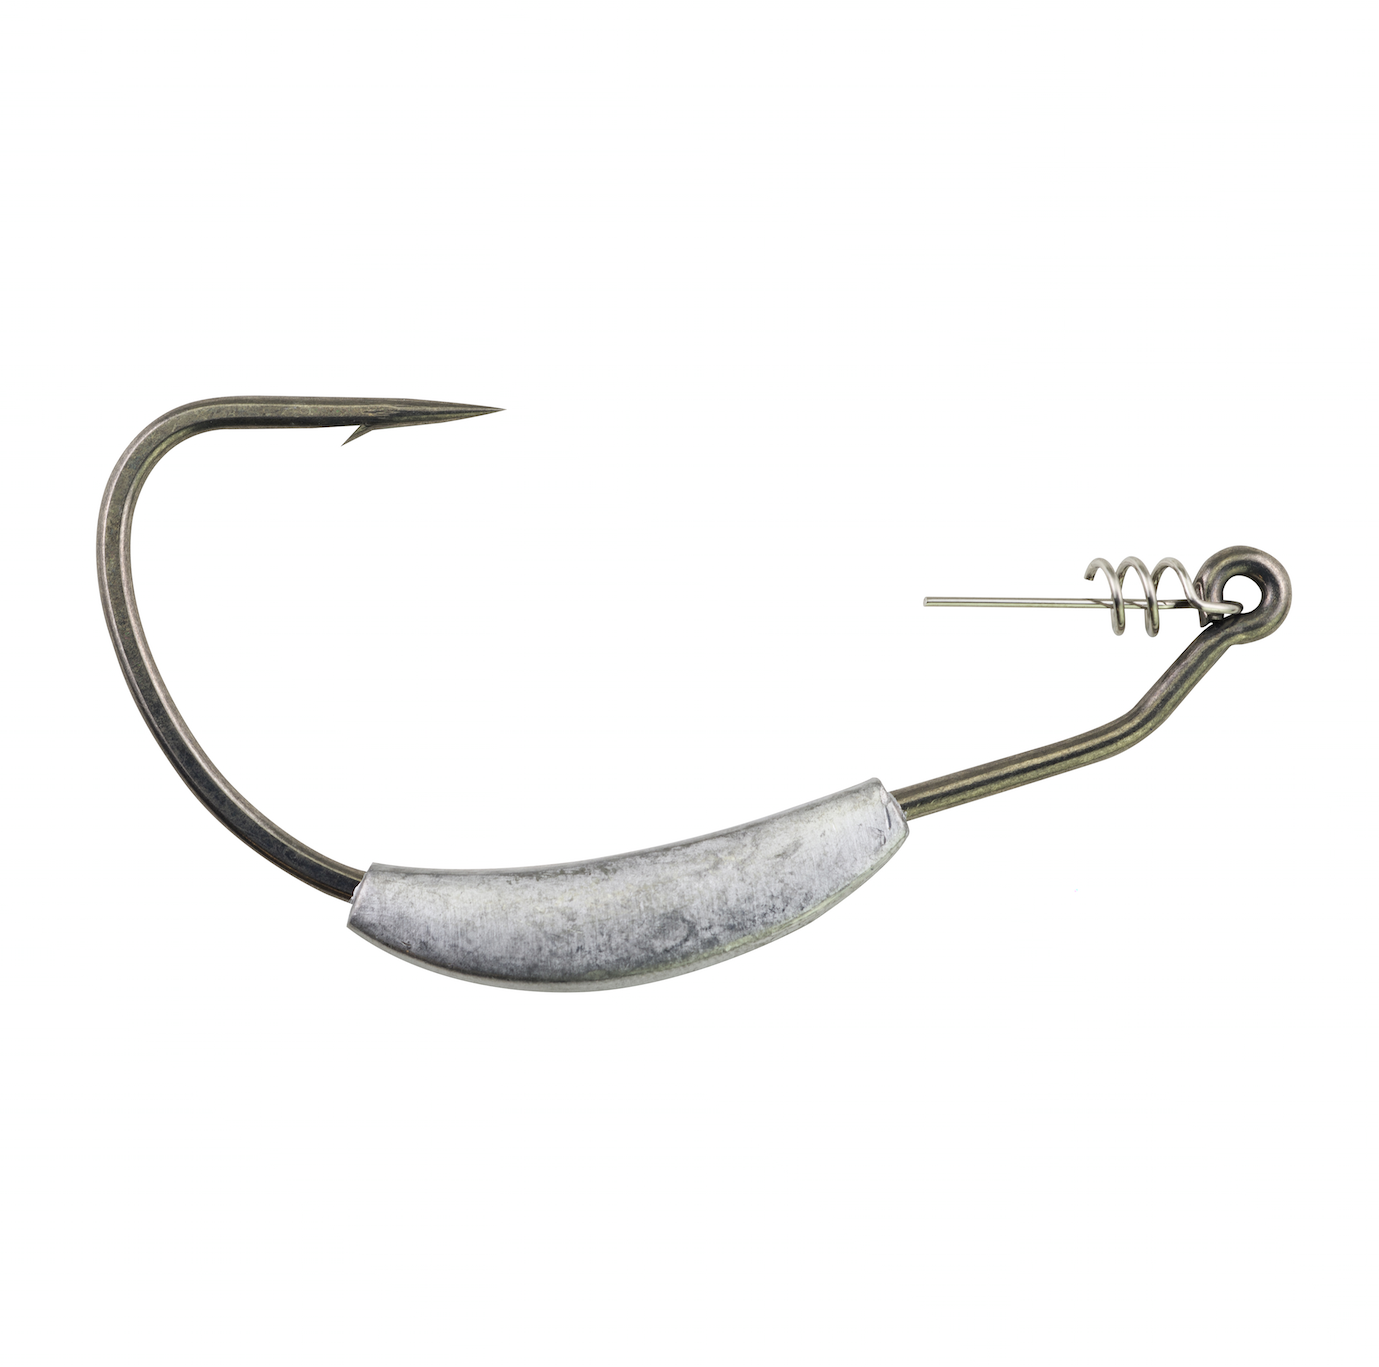 The weighted swimbait hook keeps all your swimbaits secure and running true. Each hook comes standard with a weigh and center pin attachment that keeps the bait hooked up for repeated casts. Four hooks to a package, 3/0- 7/0 for $5.99.